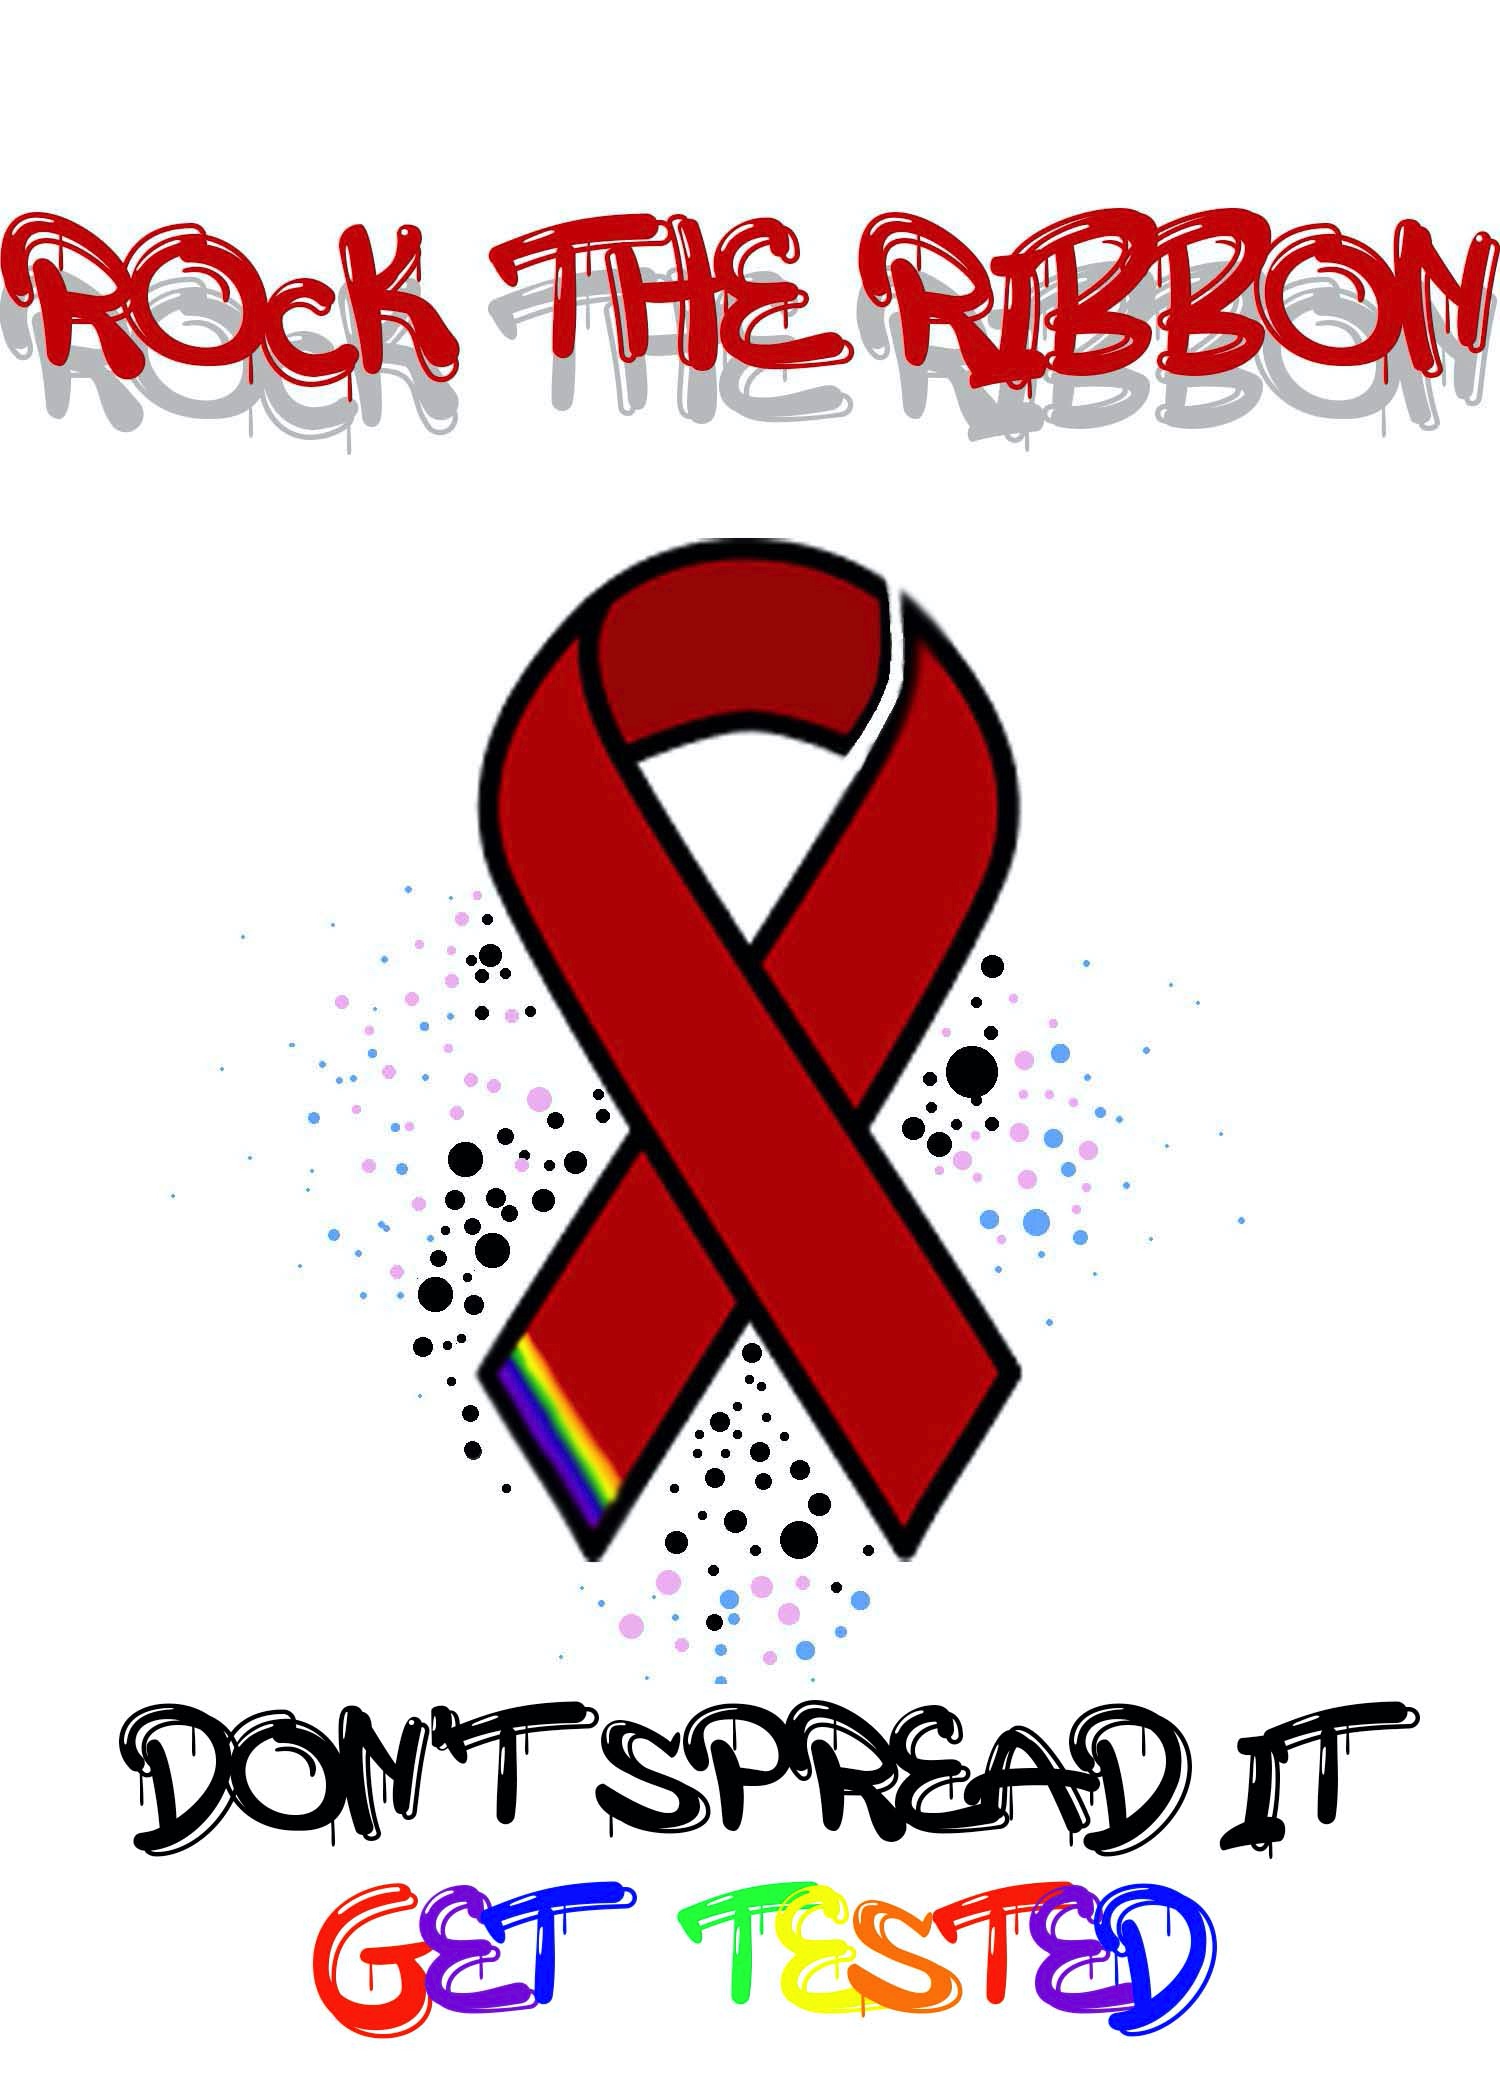 Top text: Rock the Ribbon. Bottom text: Don't Spread It, Get Tested. Red Ribbon Illustration at the center.